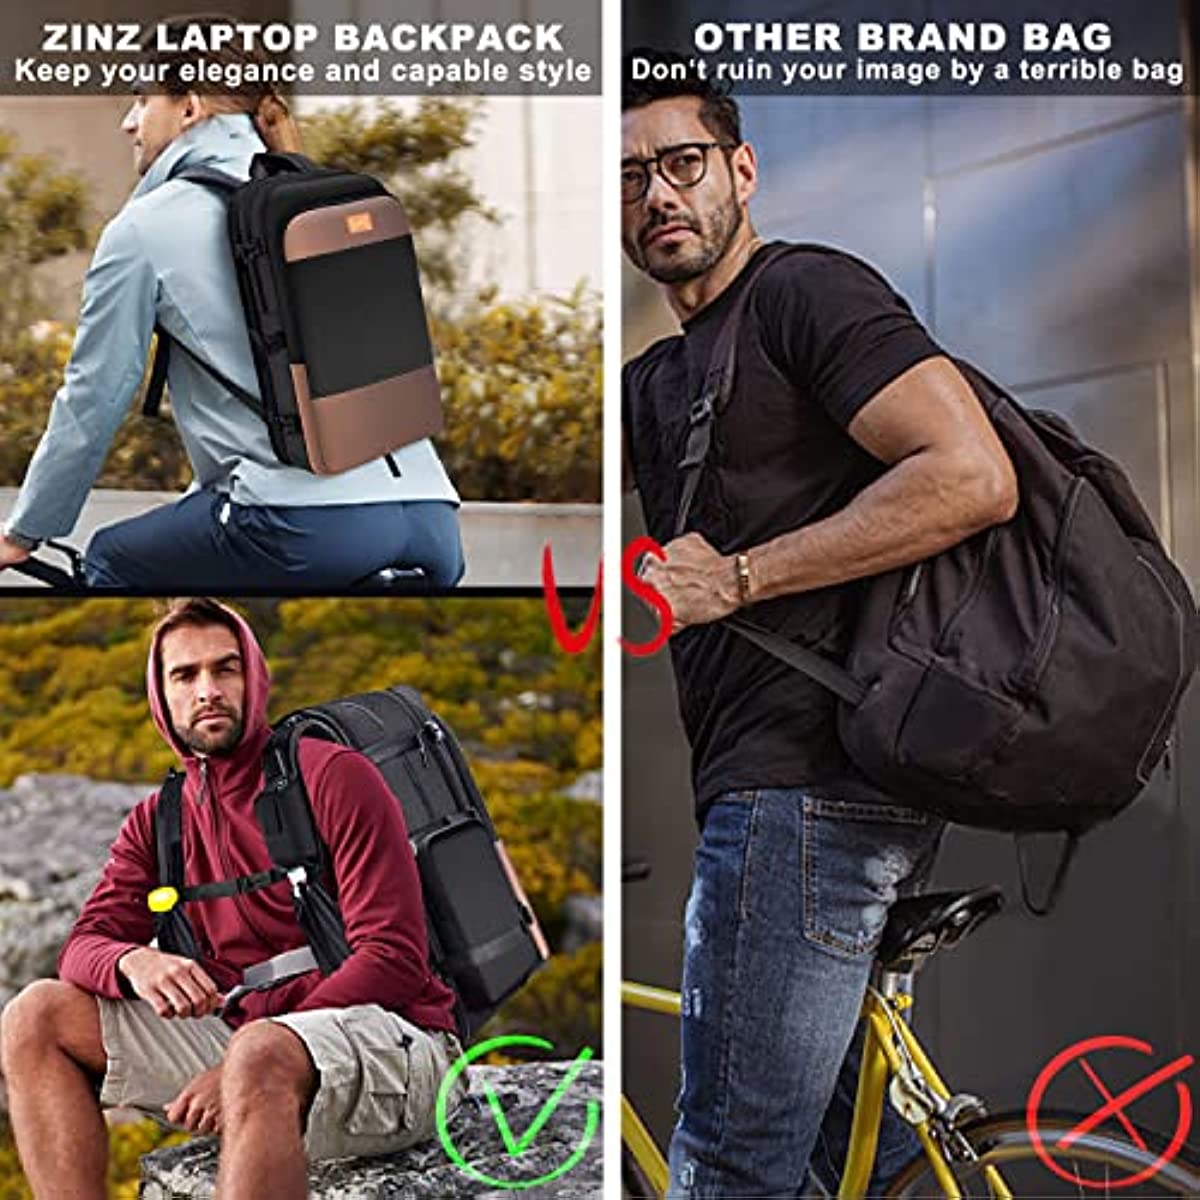 ZINZ Slim Expandable Travel Laptop Backpack 15.6 Inch with Patented Shoulder Pockets and USB, Versatile Anti-Theft Business Backpack Daypack with Ultra Capacity for Work/School/Hiking/Camping,Black